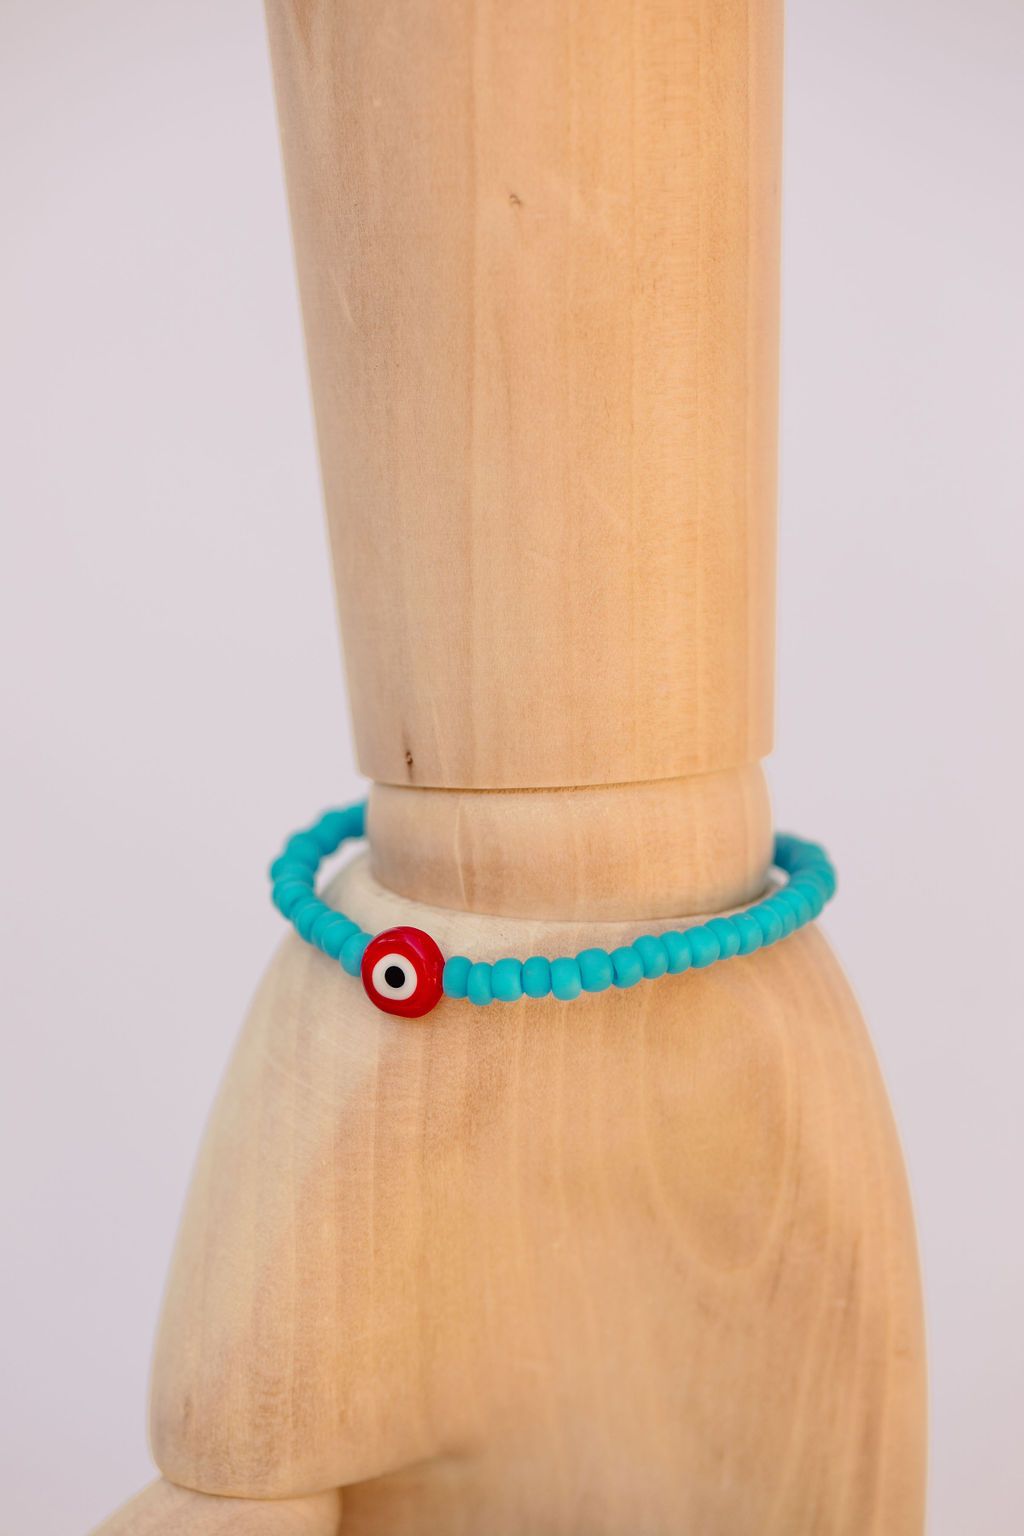 Turquoise Japanese glass beads on sturdy elastic. For that little pop of color and protection for your personal space bubble. Wear just one or stack 'em.